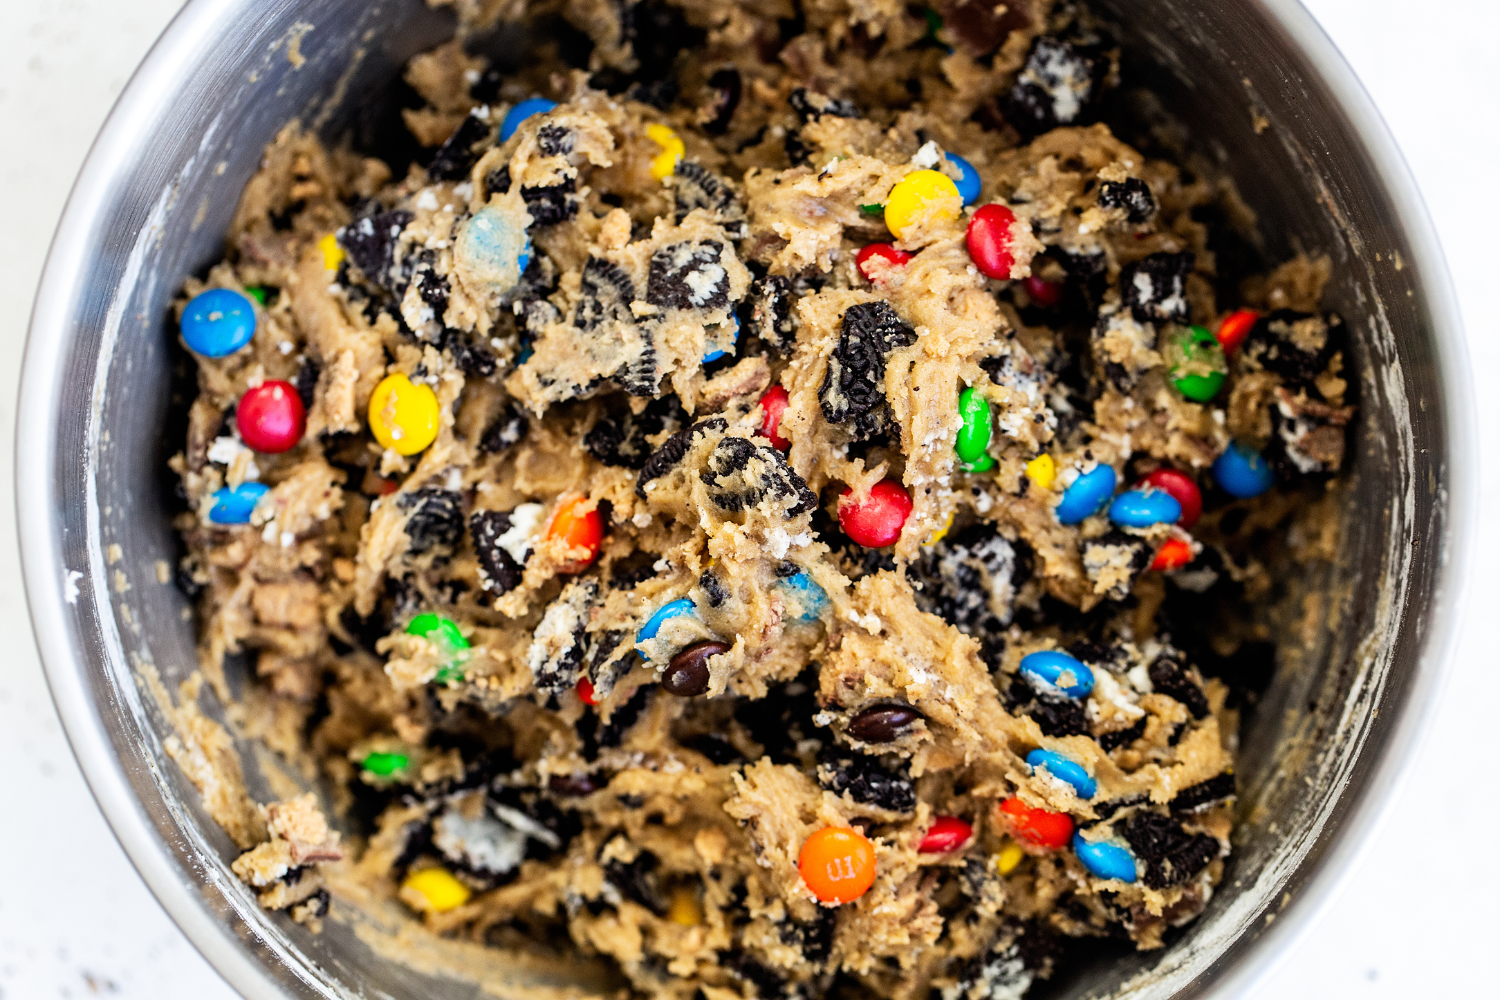 all the leftover halloween candy chopped up and incorporated into easy cookie dough, for a super quick and delicious cookie bar!